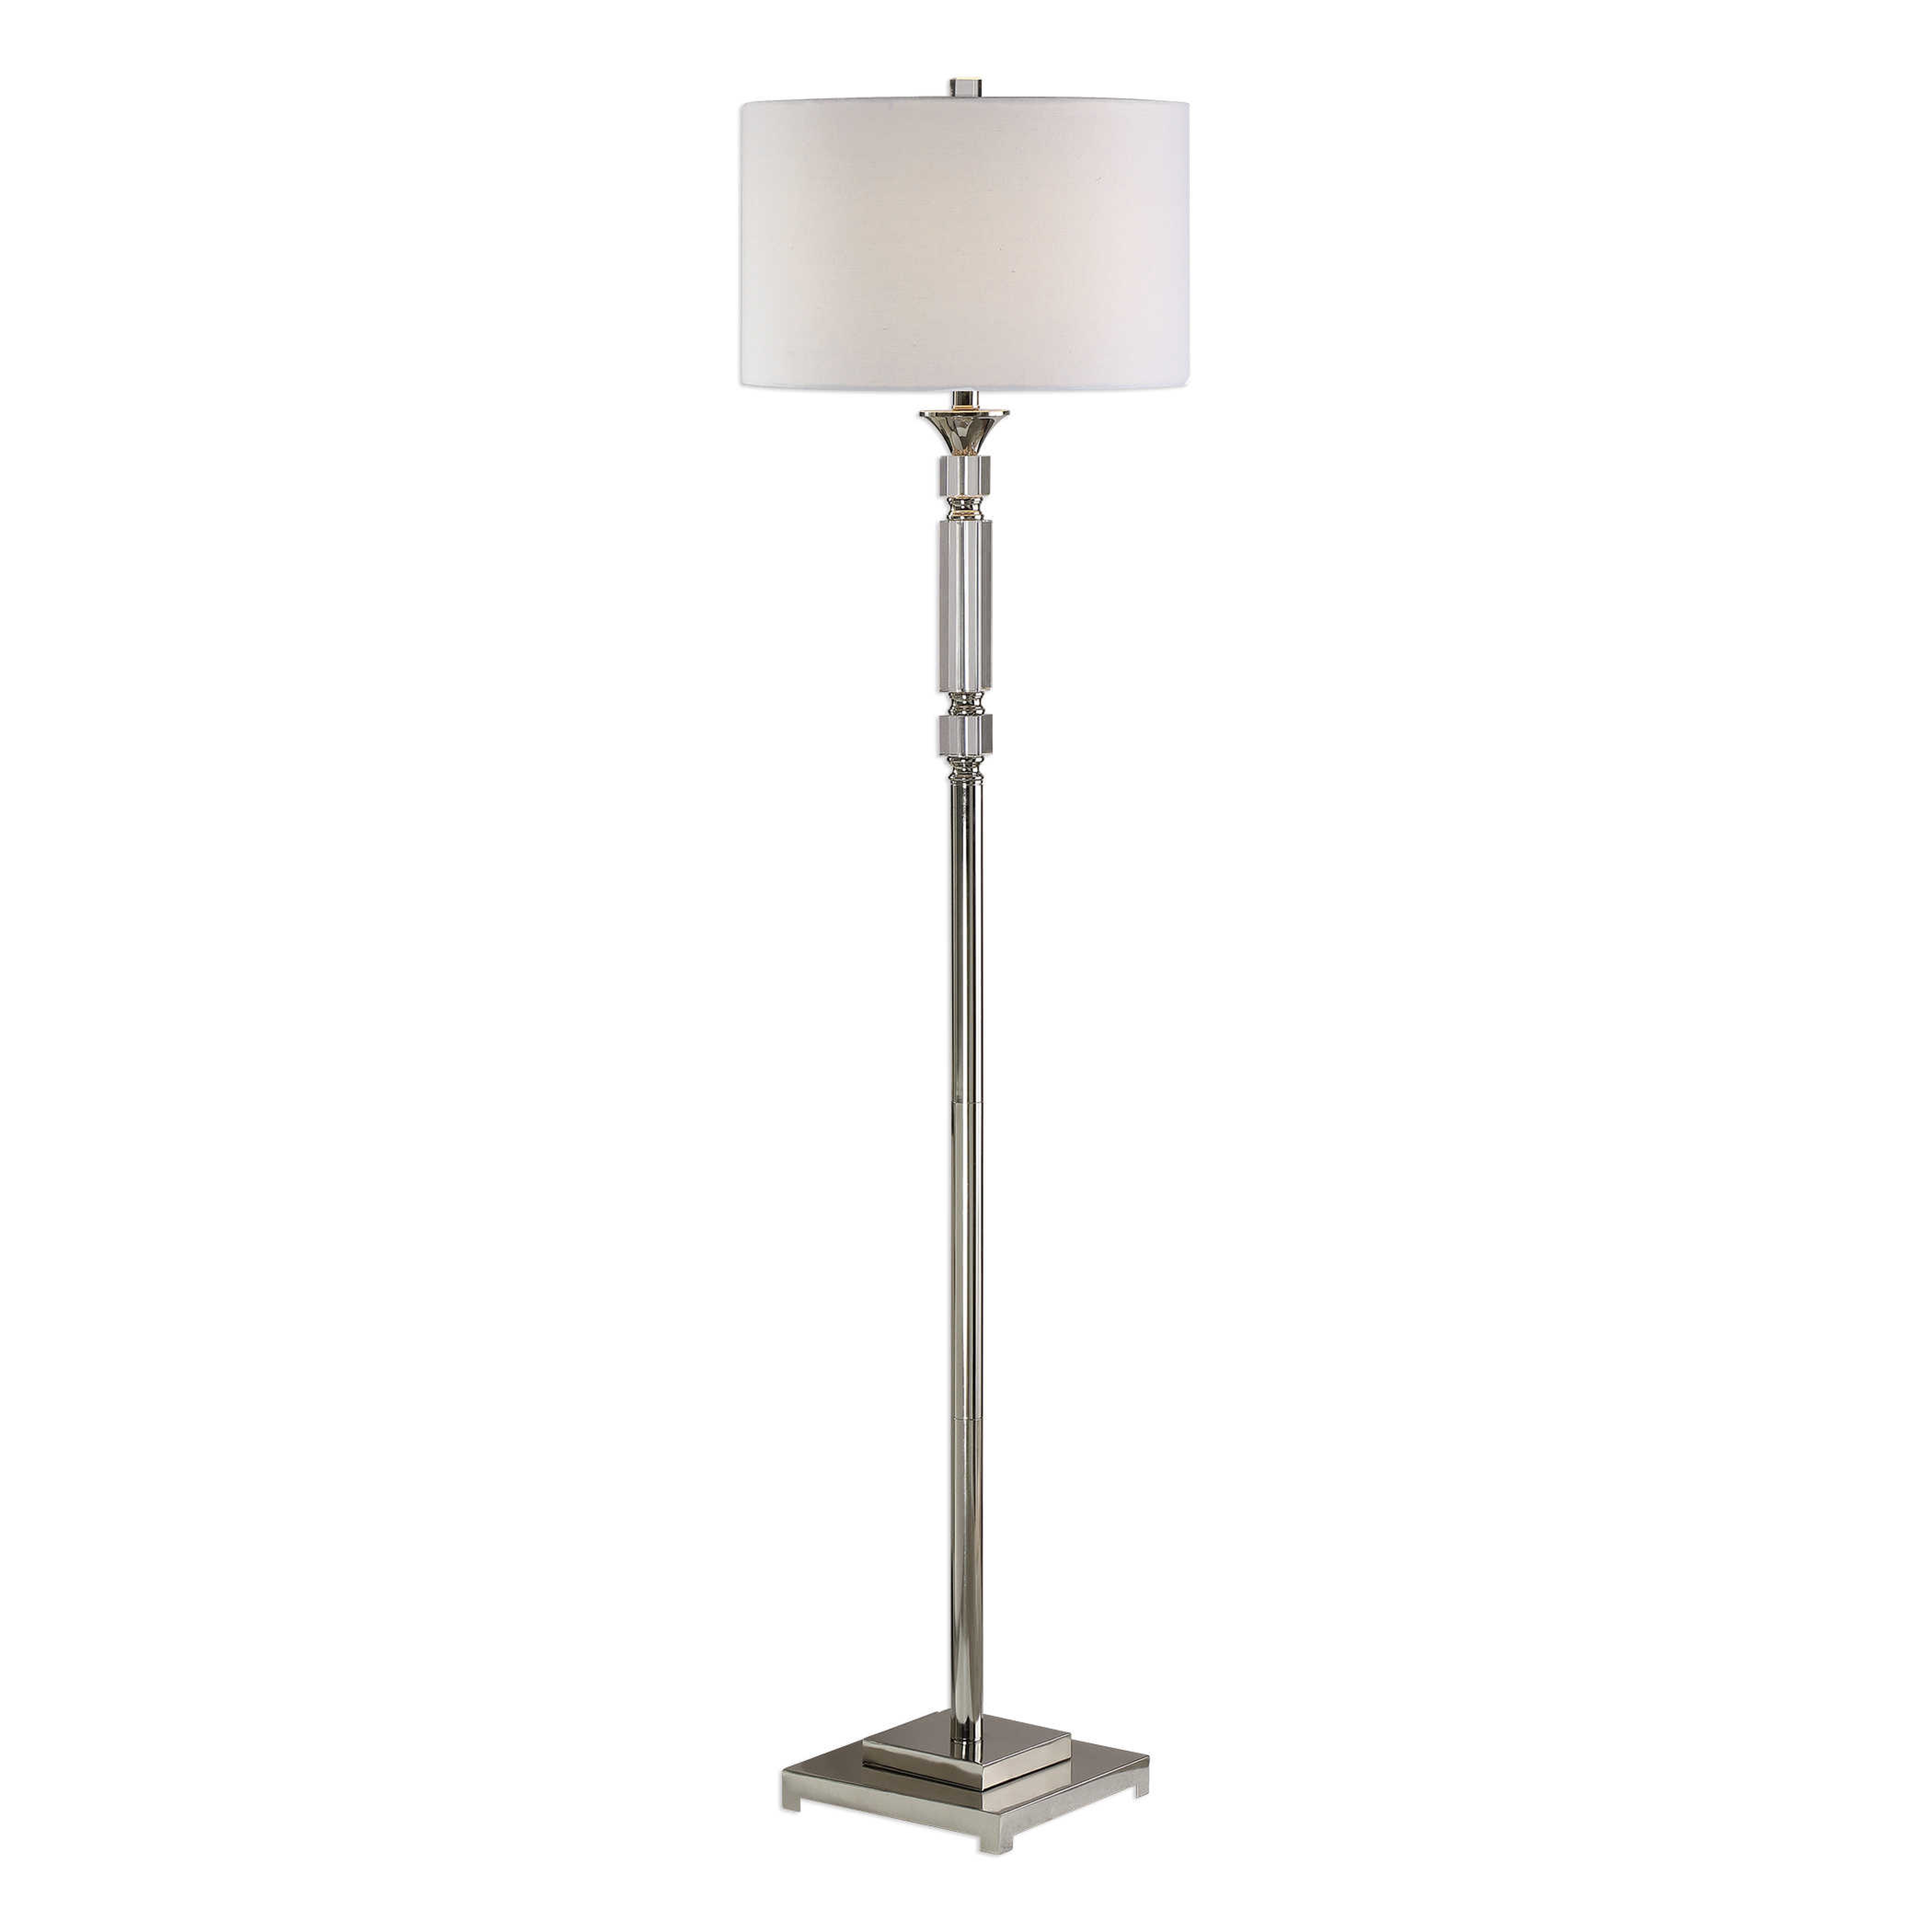 Volusia Polished Nickel Plated Floor Lamp - Hudsonhill Foundry